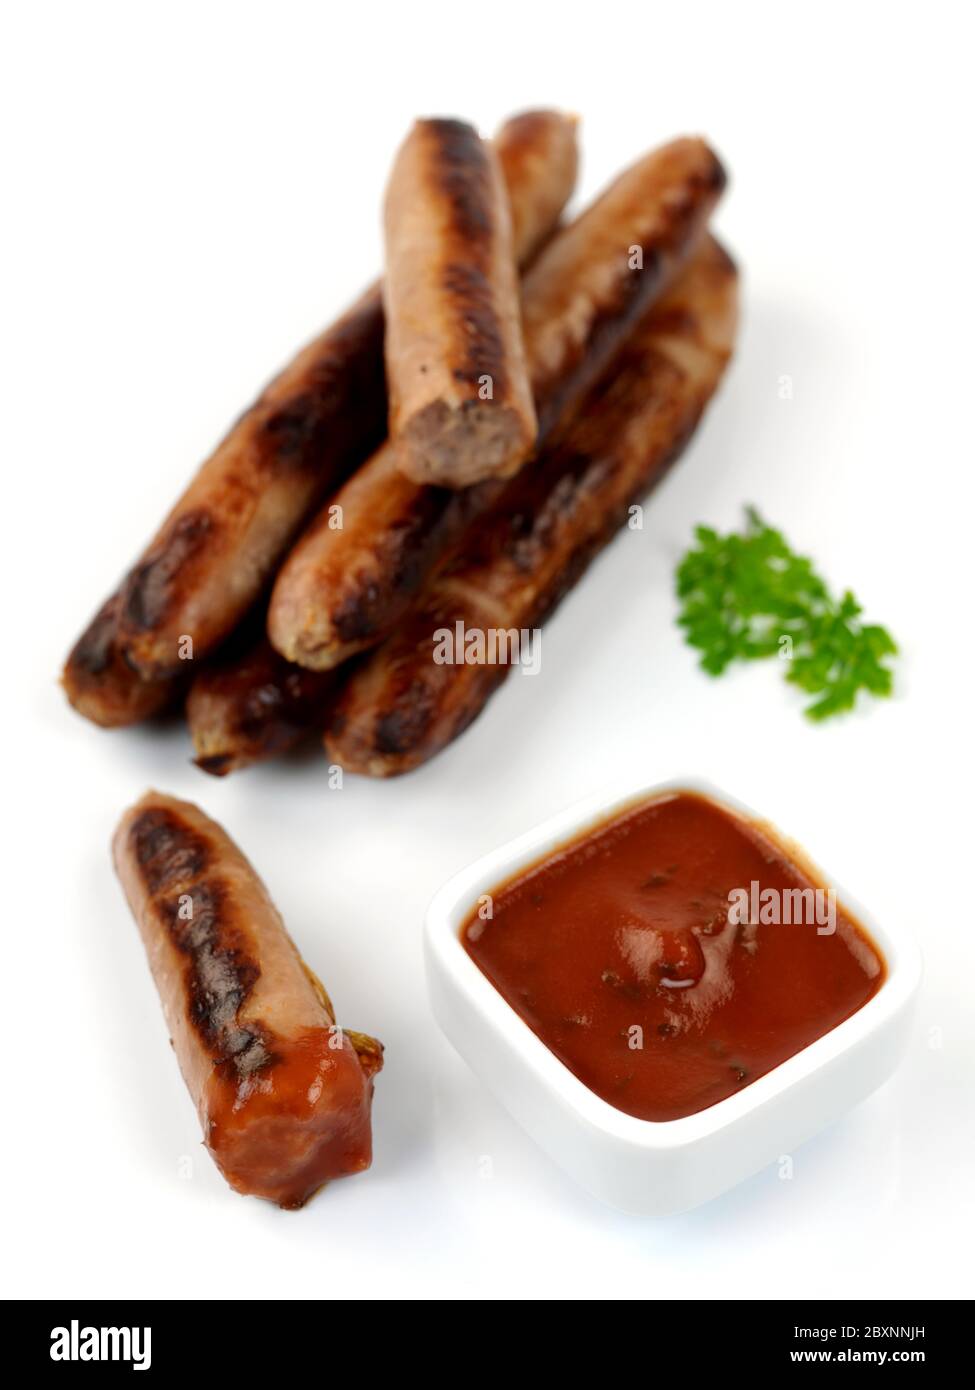 Cooked pork Sausages on a cork board isolated against a white background Stock Photo